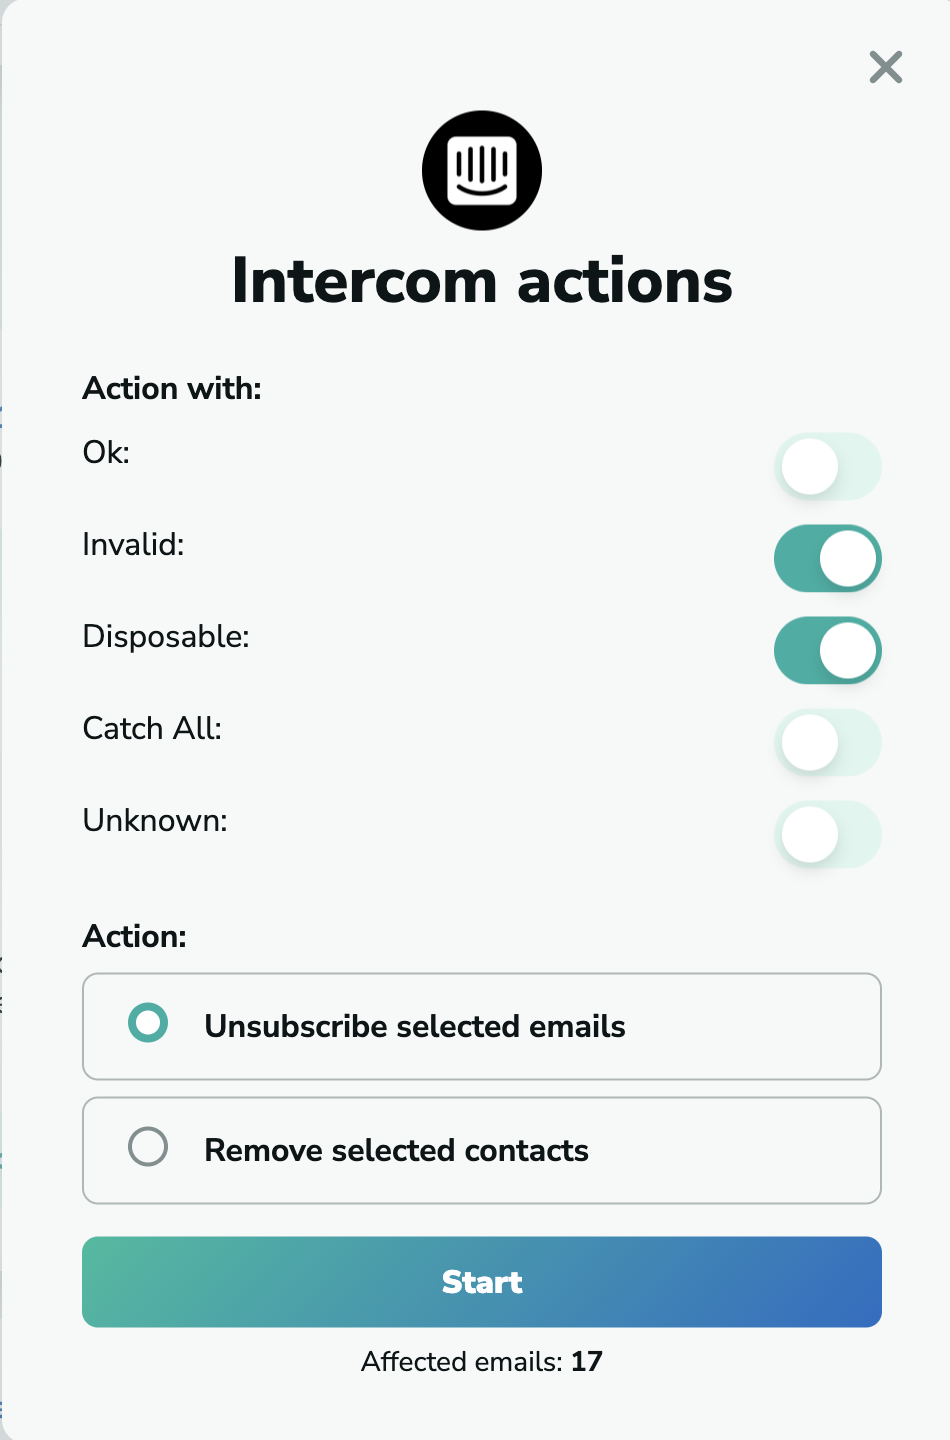 Intercom unsubscribe selected emails in MillionVerifier